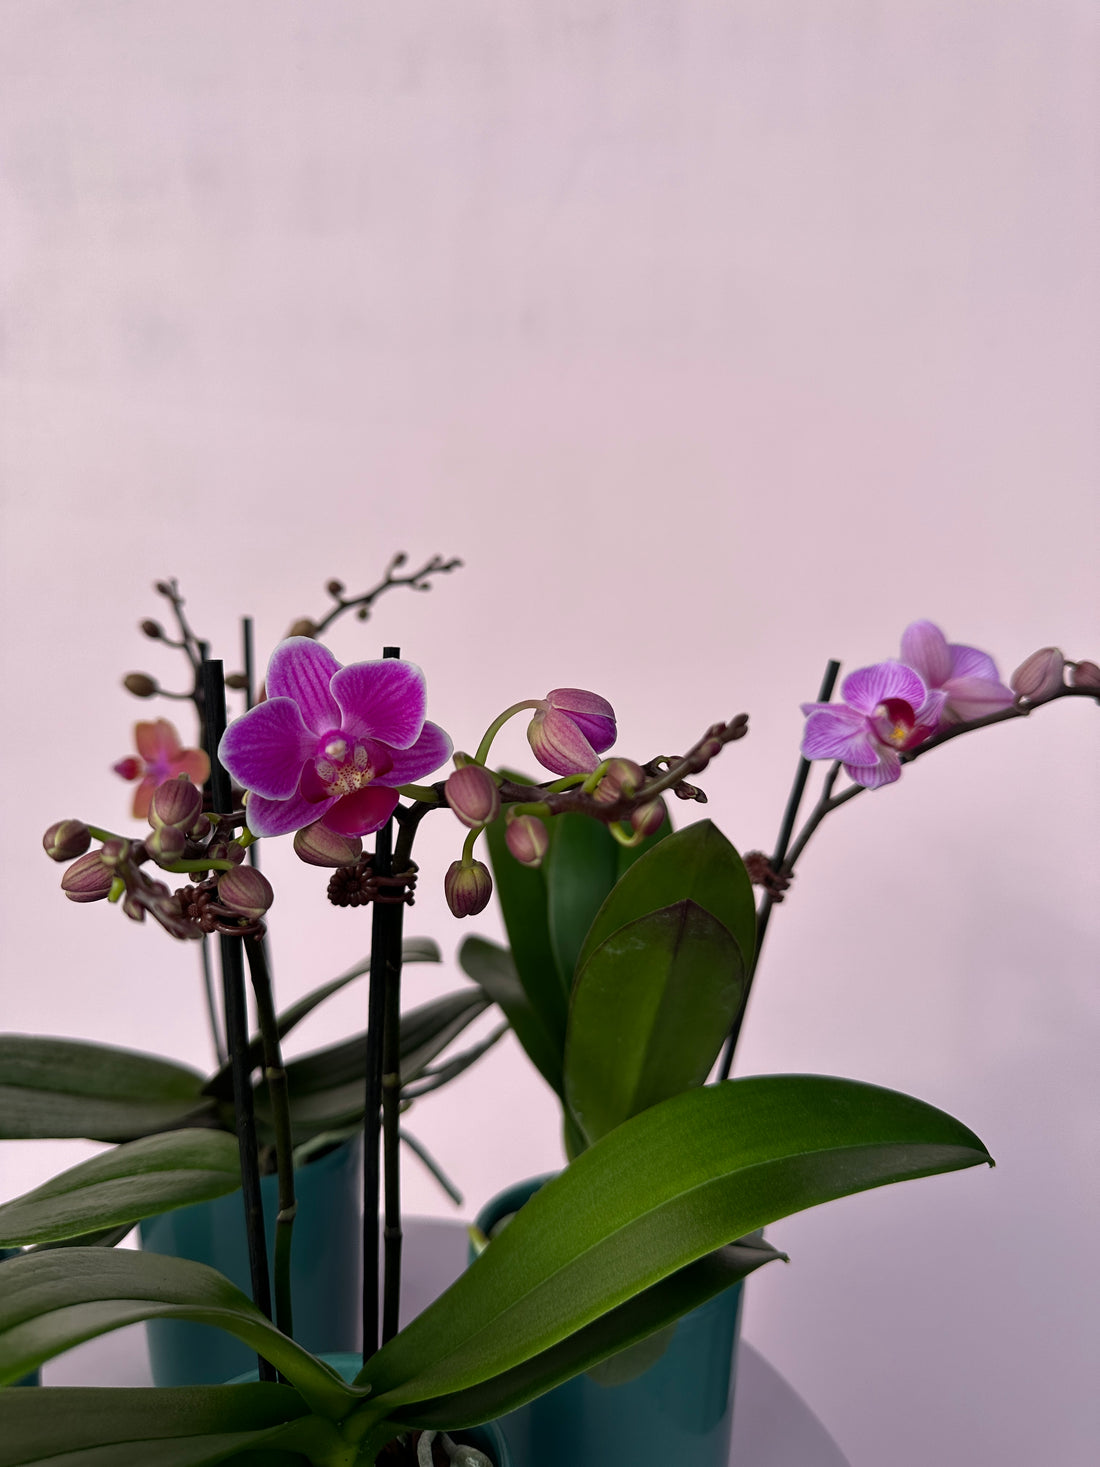 How to Care for Your Orchid